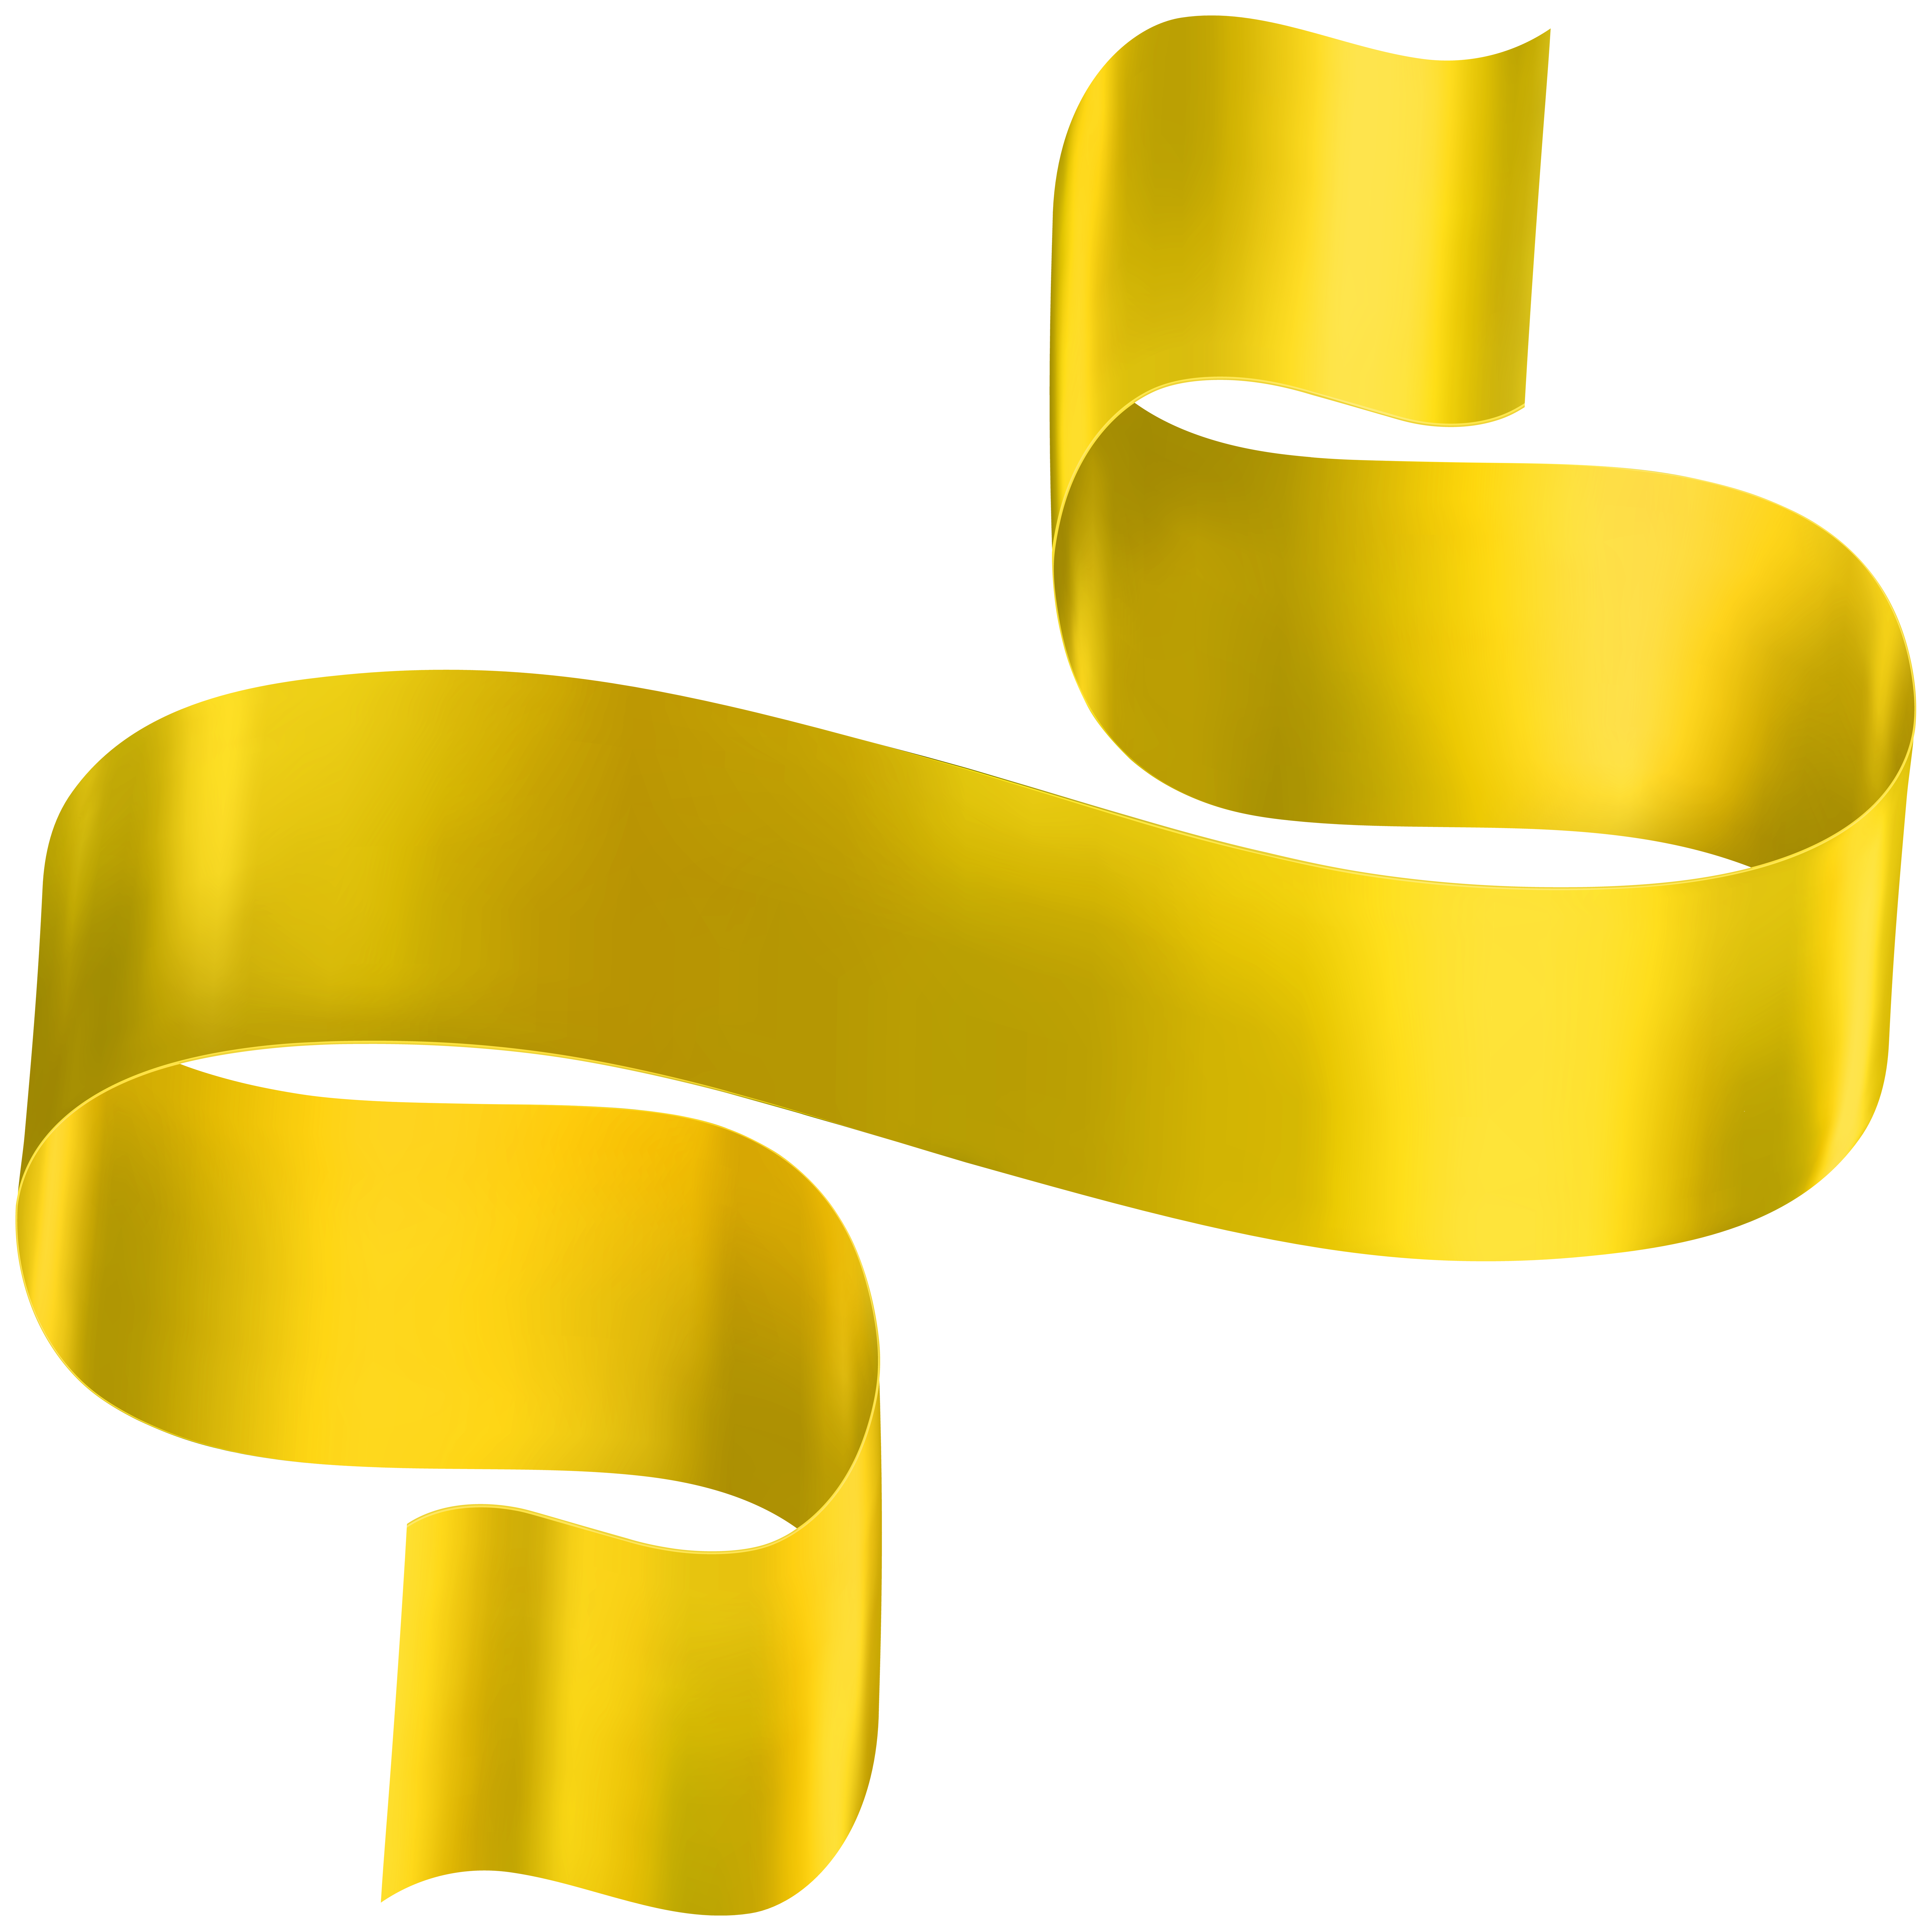 Yellow Ribbon PNGs for Free Download